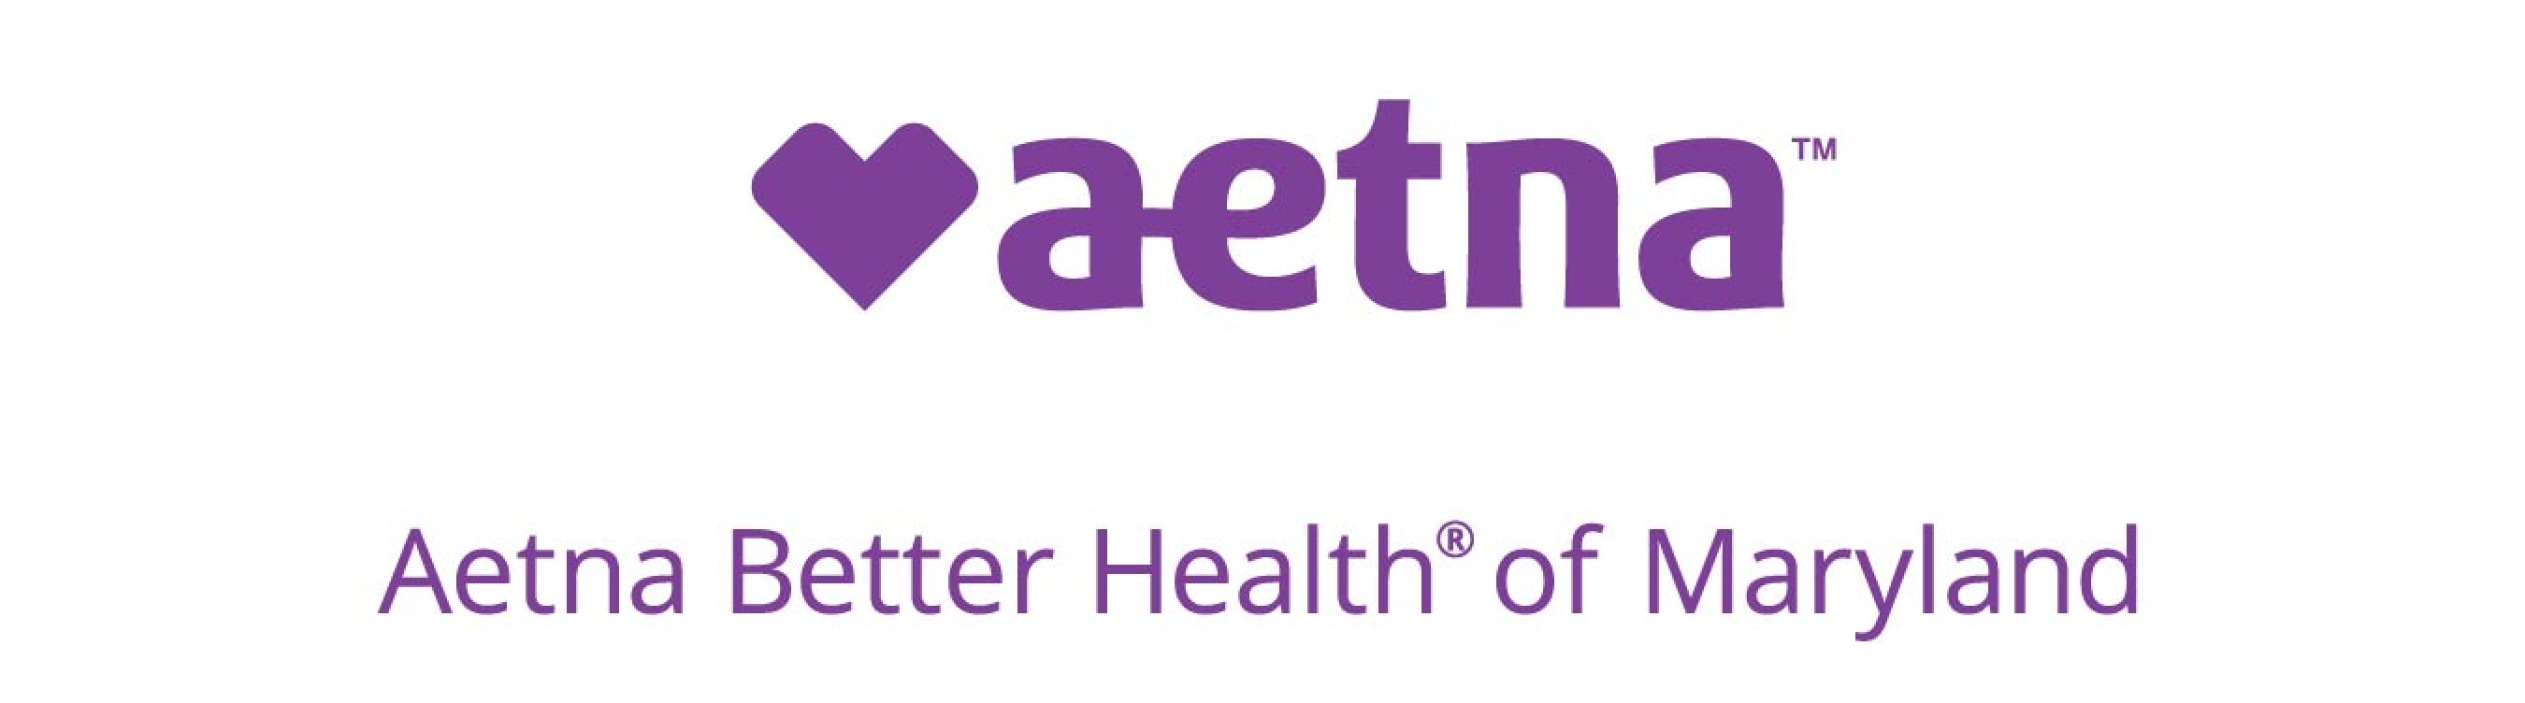 Aetna Better Health of Maryland